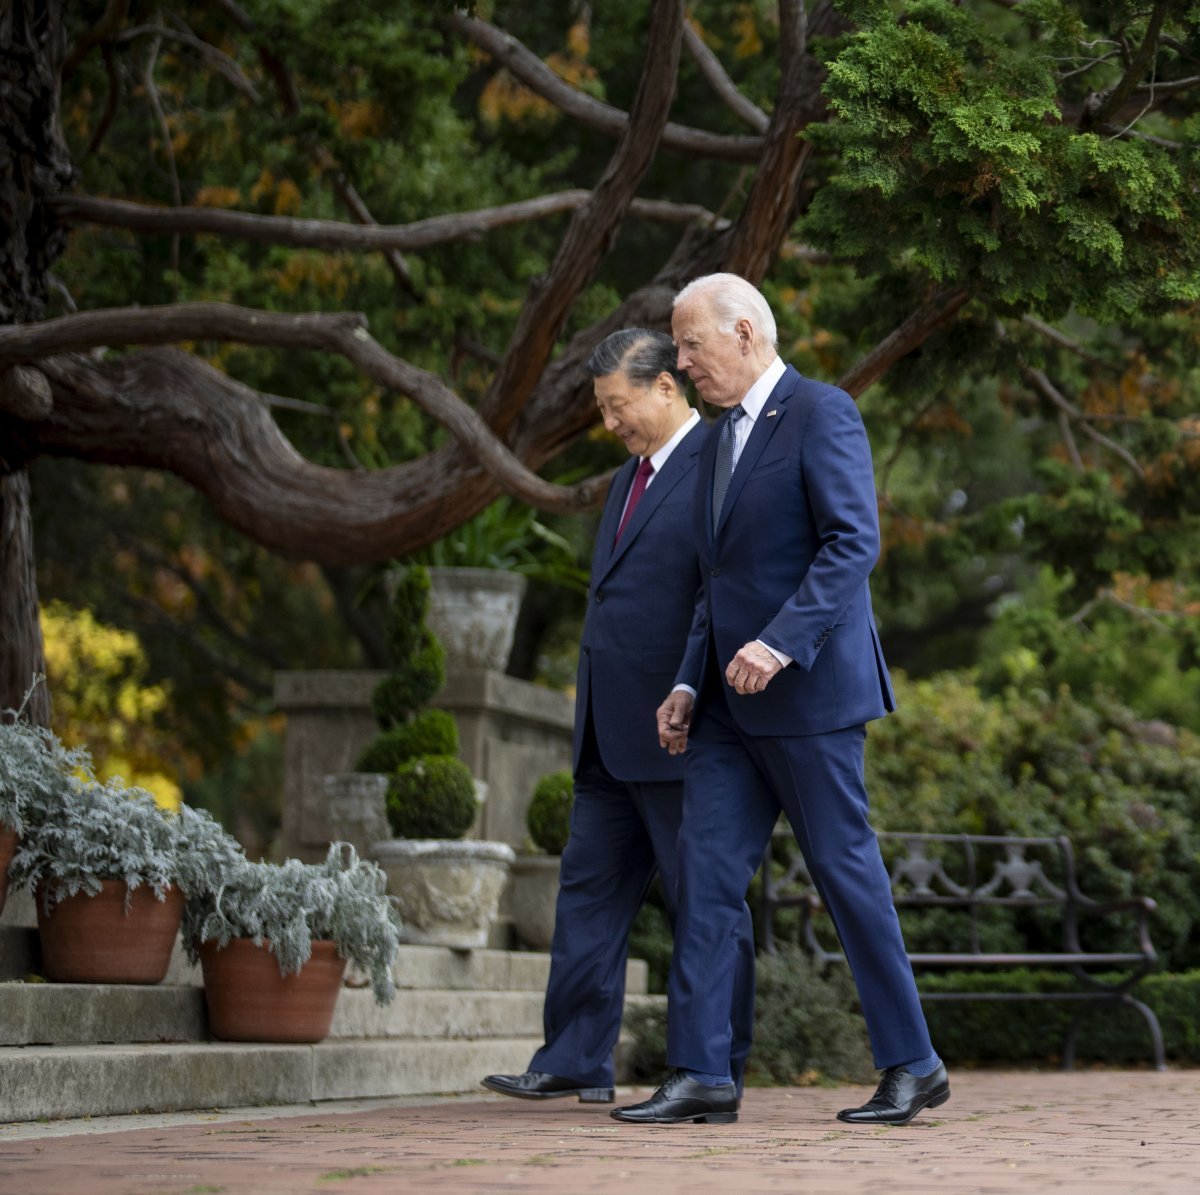 President Joe Biden and China's President President Xi Jinping walk in the gardens at the Filoli Estate in Woodside, Calif., Wednesday, Nov, 15, 2023, on the sidelines of the Asia-Pacific Economic Cooperative conference. AP